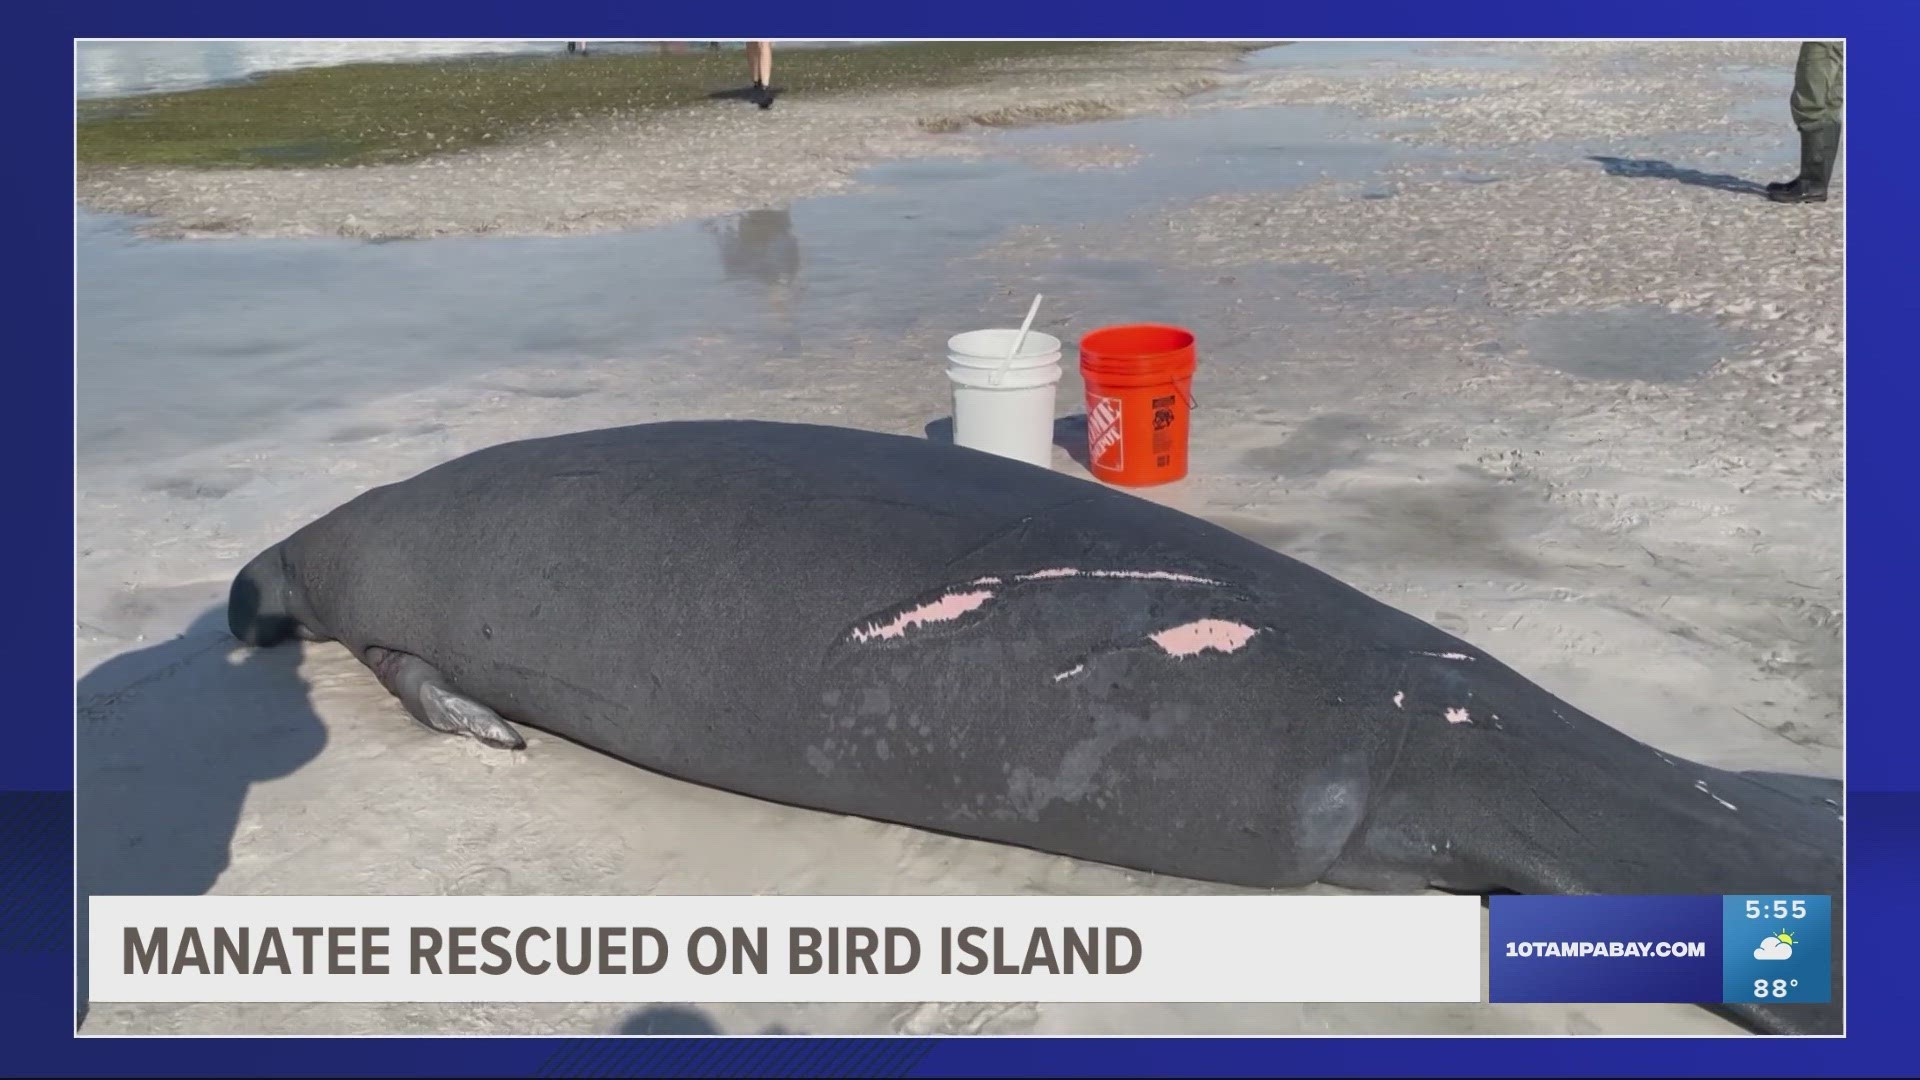 The 10-foot-11 female manatee was estimated to be between 10 and 20 years old, weighing around 1,000 pounds.